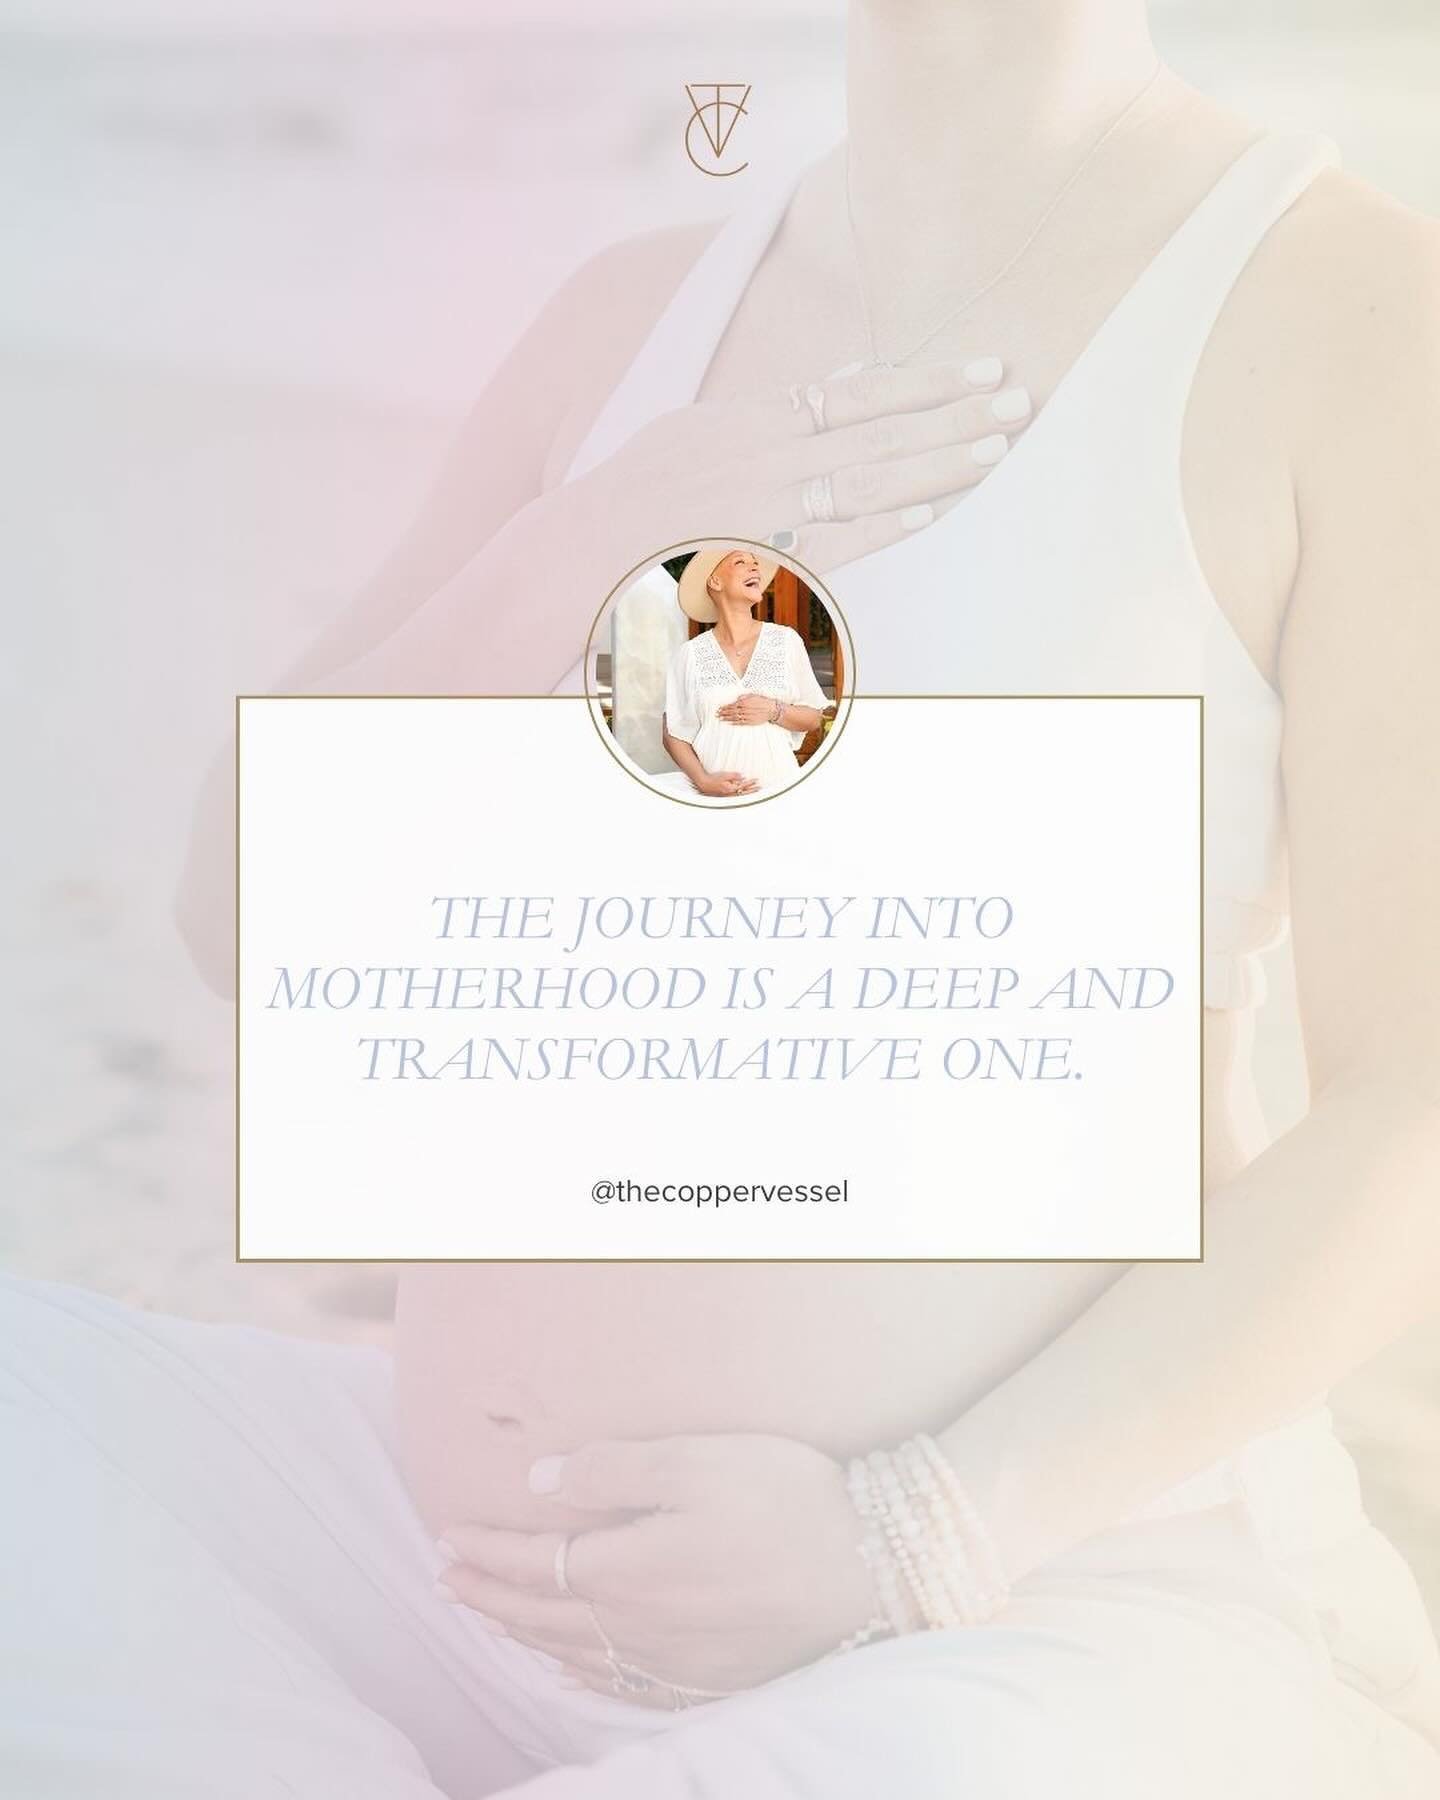 Sound healing helped me to feel at peace during my pregnancy&hellip;

Even before I took the test, I knew.

I felt something shifting within me.

In a matter of weeks, I began to feel physically, emotionally, and spiritually different. And when I saw